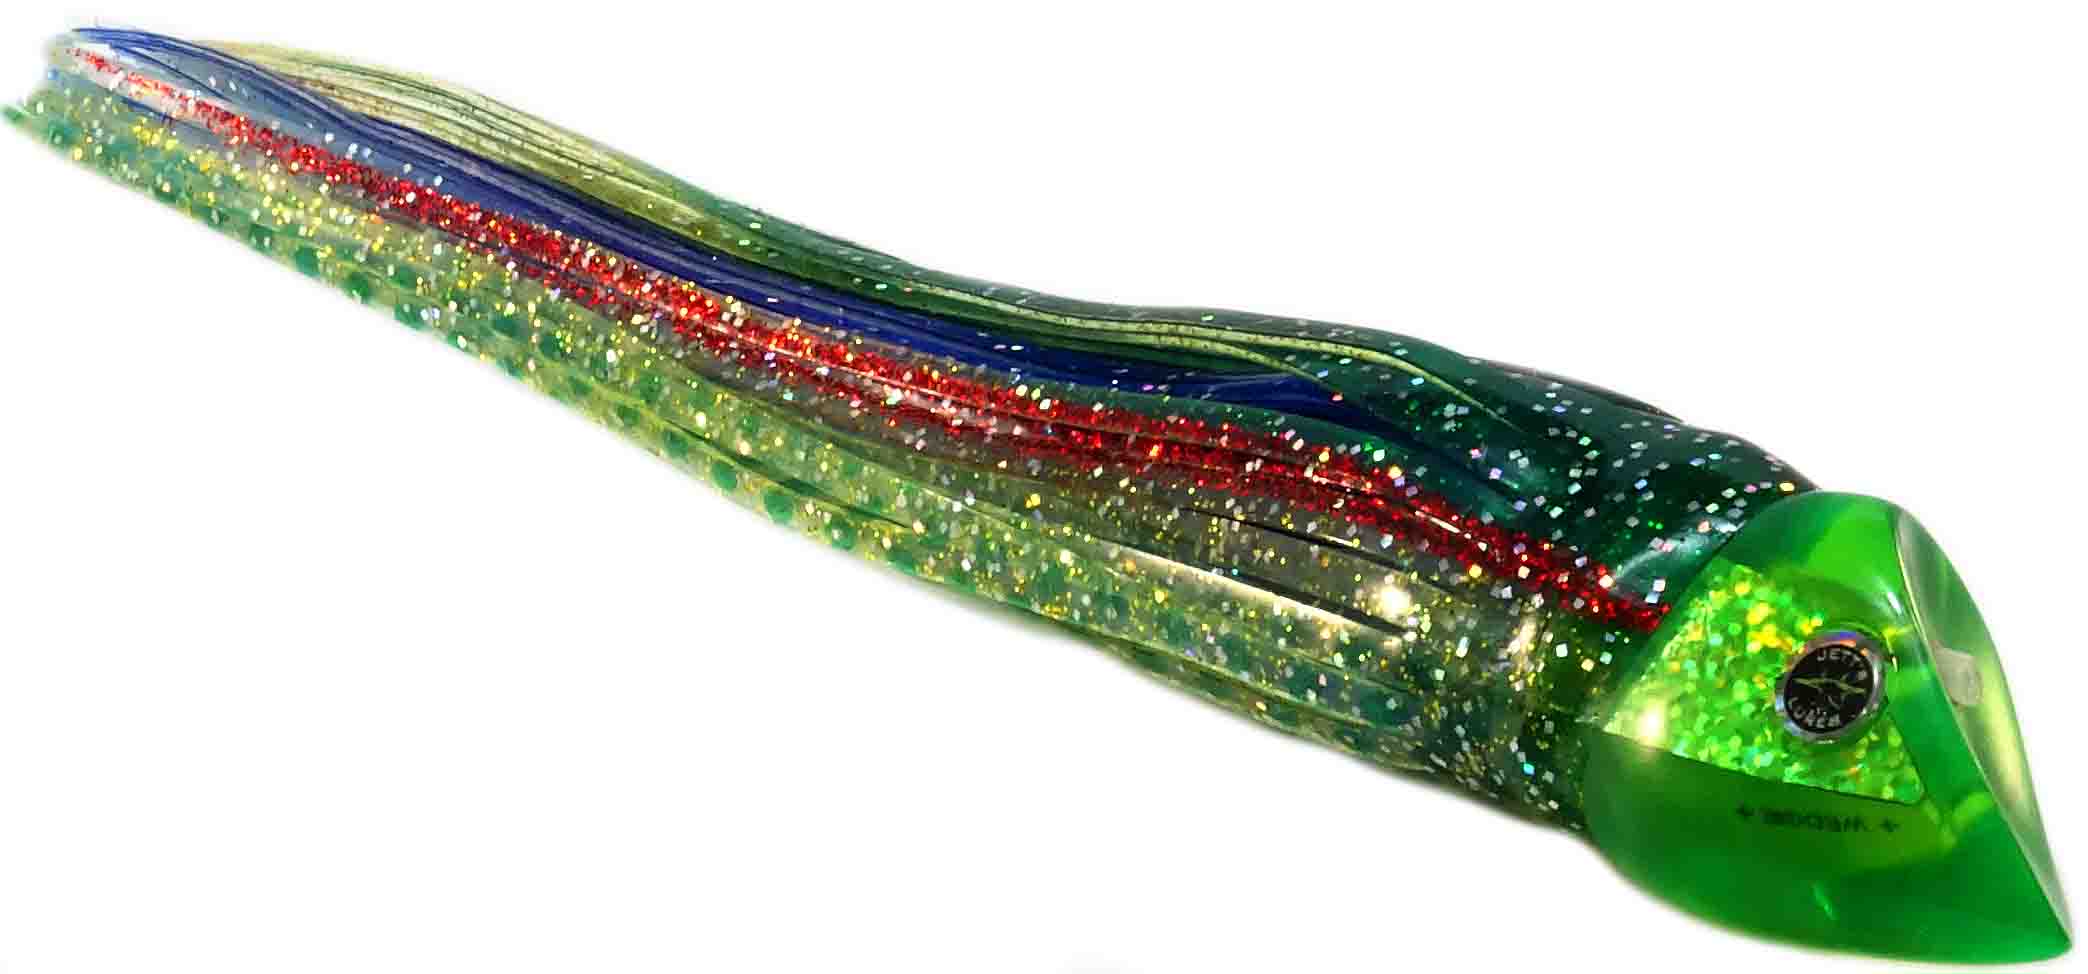 Jetts Lures - Wedgie Series - Anti-Evil